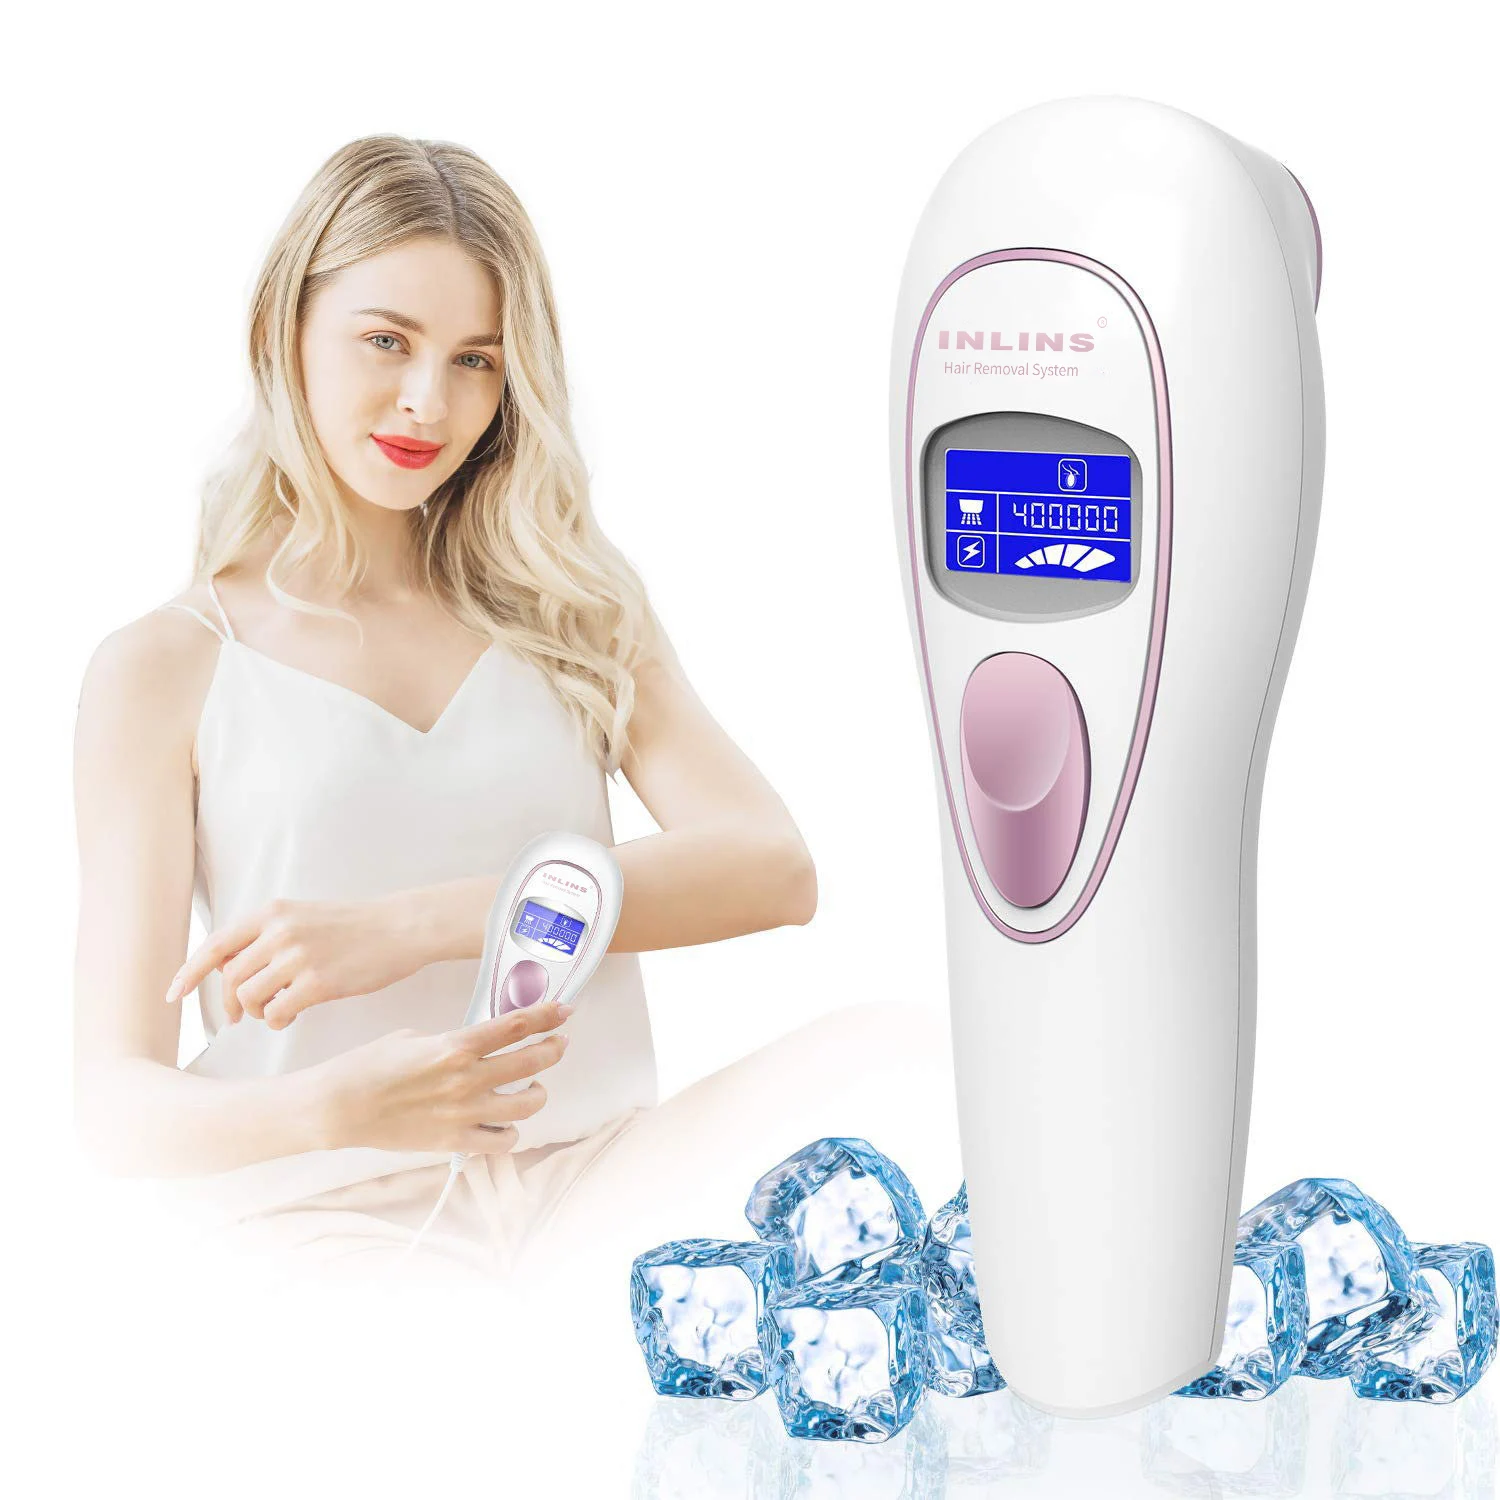 Newest Ice Cool Painless Mini Portable  Hair Removal Diode Laser IPL Epilator Devices With LCD Screen For Home Beauty Use enlarge